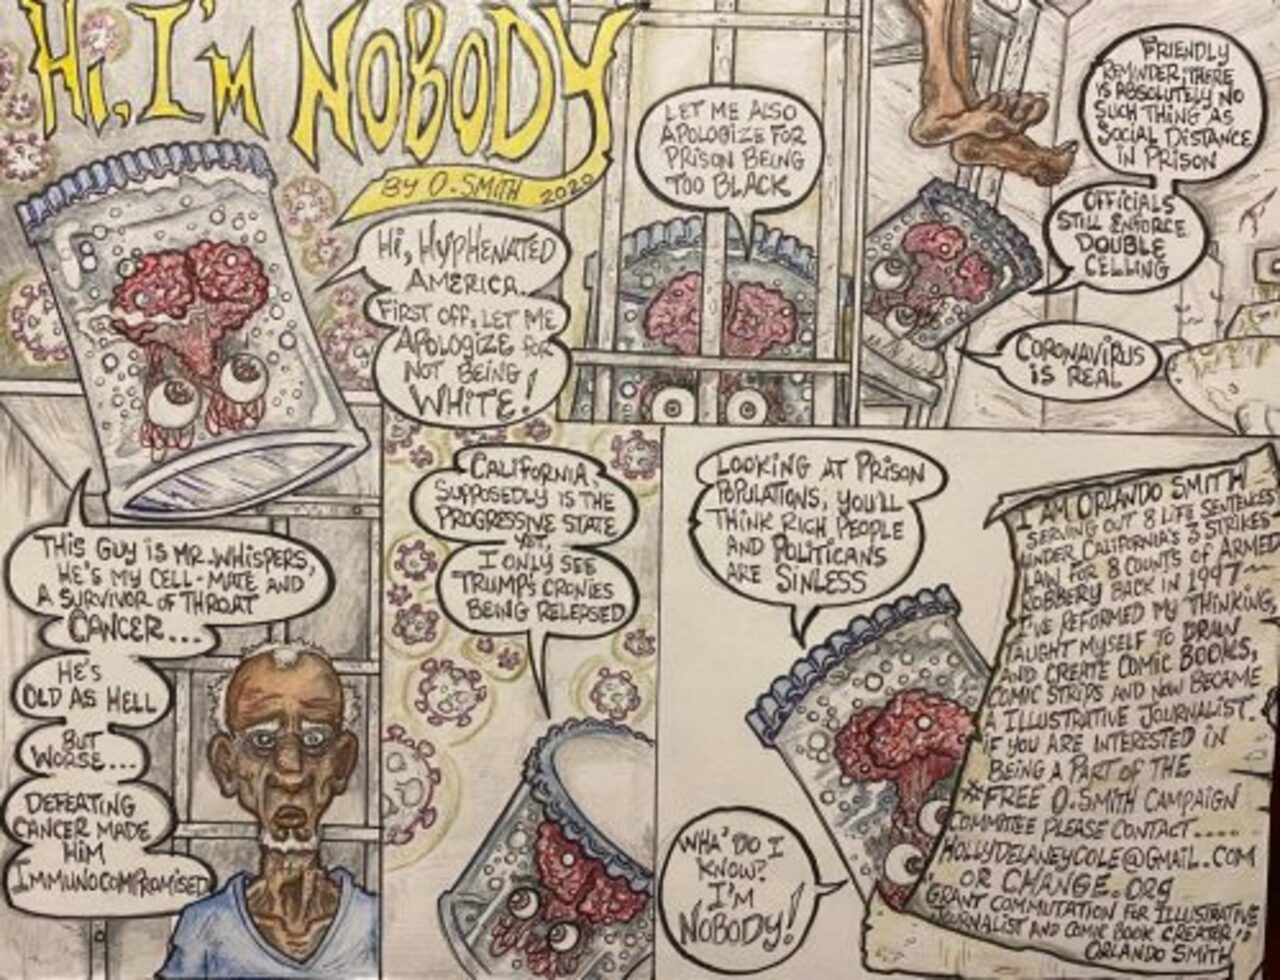 Incarcerated Artist Chronicles Life in San Quentin Prison During Pandemic